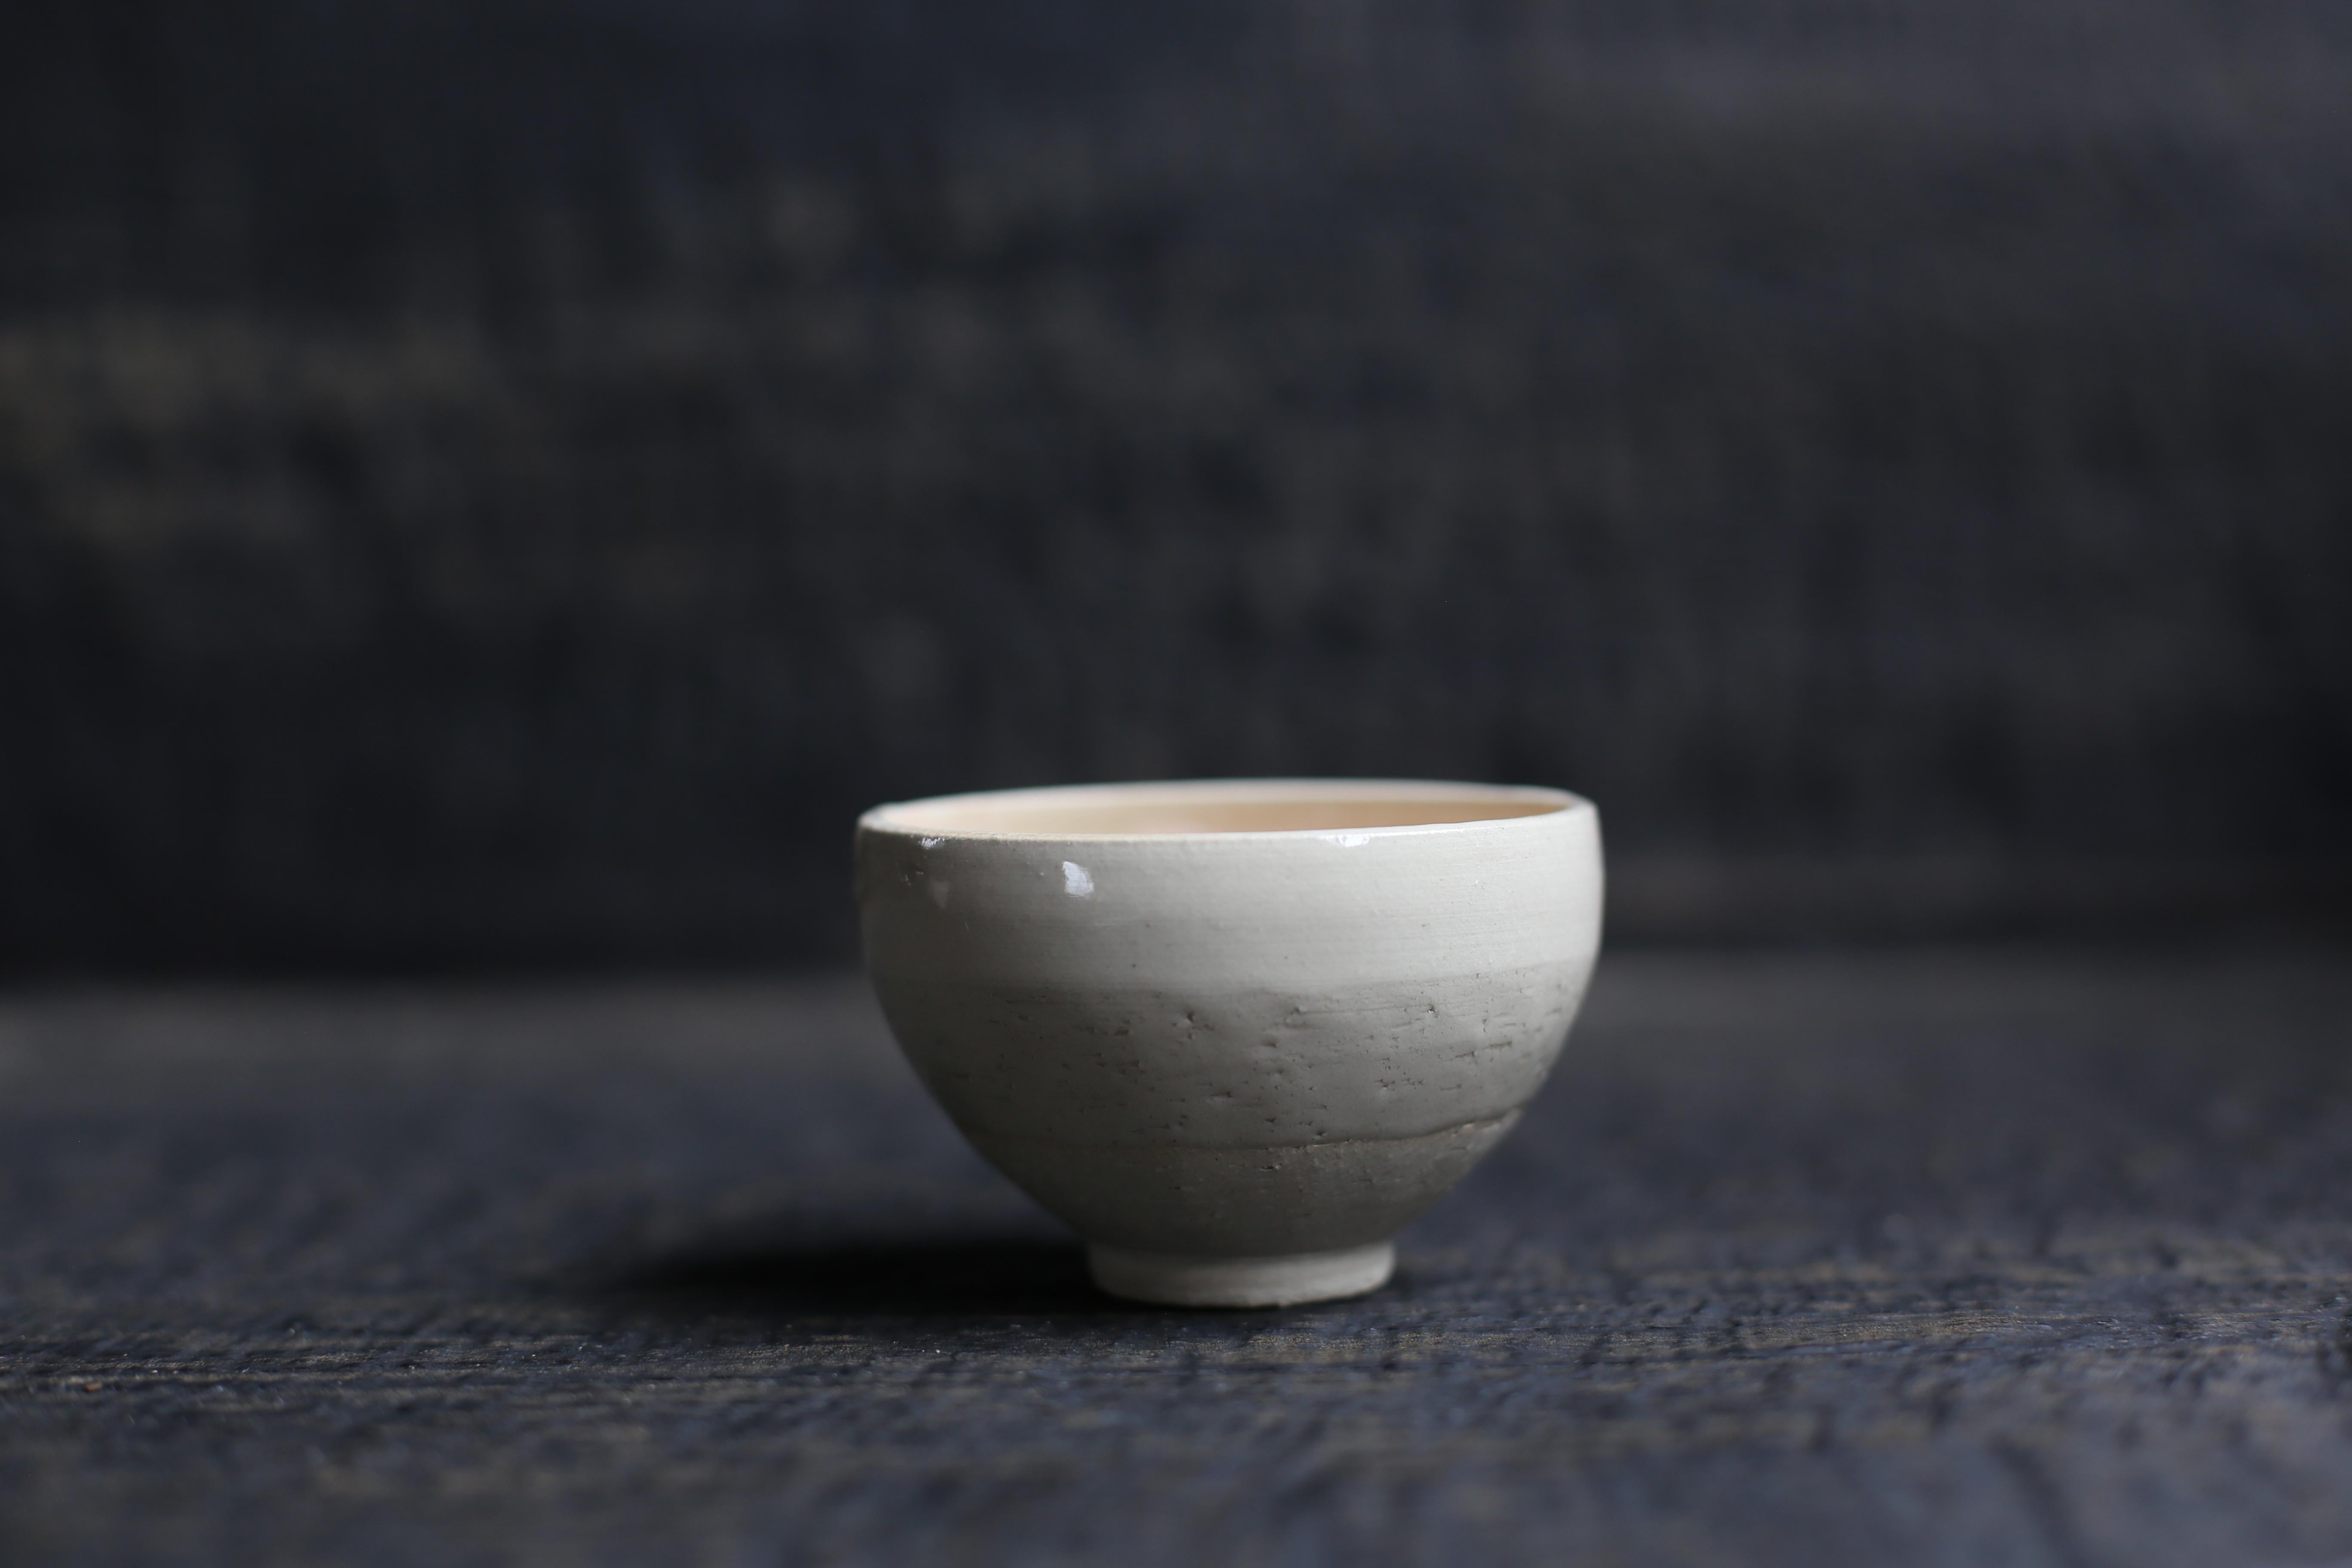 Cup in white clay with cream glaze
2022s / Belgium
Size : f85 h55 mm
Artist : Sigrid Volders


[Sigrid Volders]
Based in Antwerp, Belgium, she works vigorously as a ceramic artist, mainly as a hair-making artist active in media such as